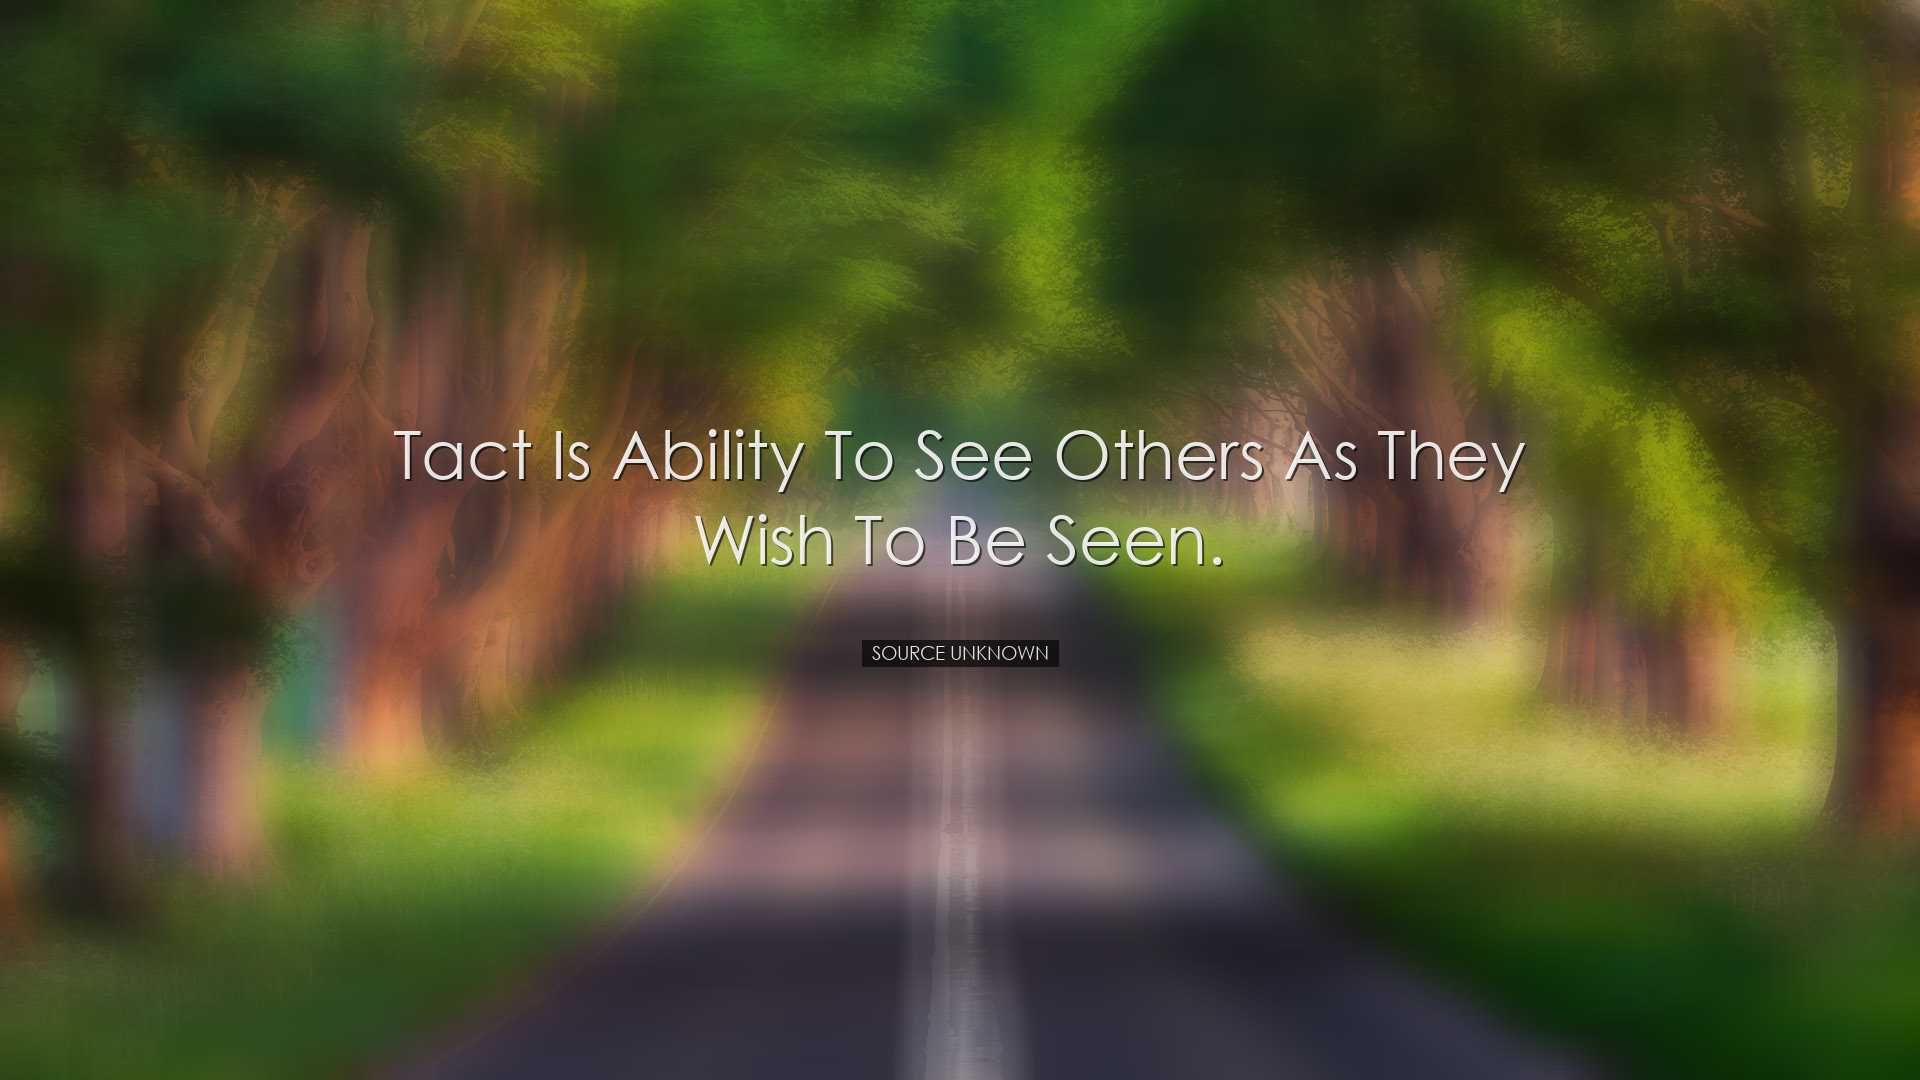 Tact is ability to see others as they wish to be seen. - Source Un